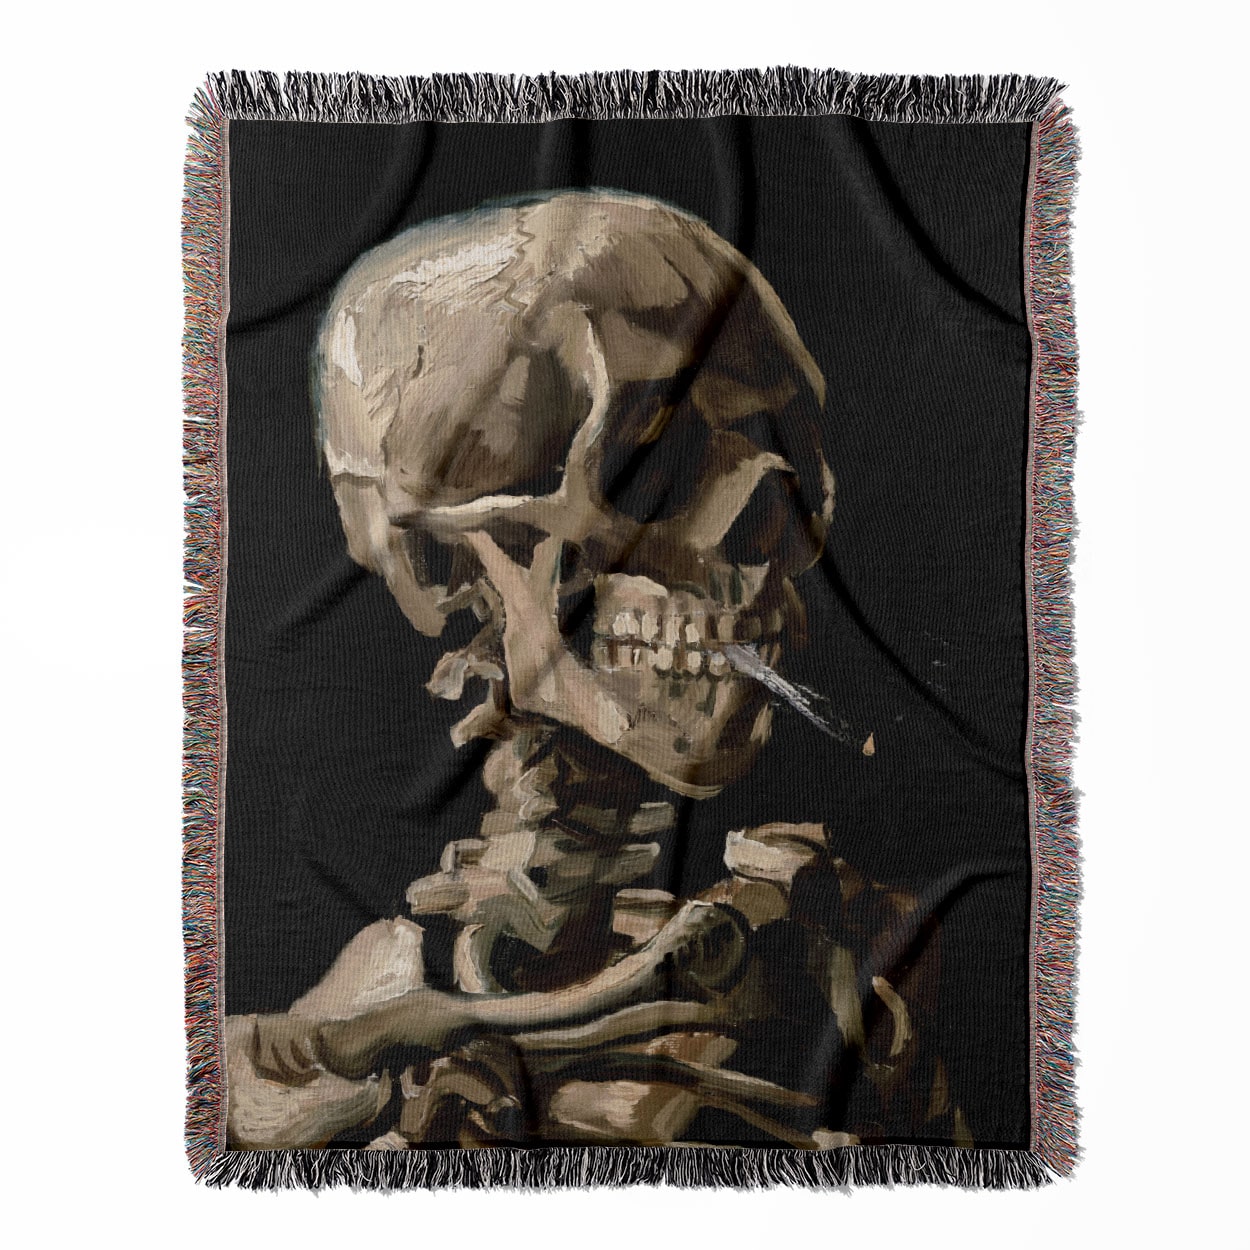 Van Gogh Skeleton woven throw blanket, made with 100% cotton, providing a soft and cozy texture with a burning cigarette design for home decor.